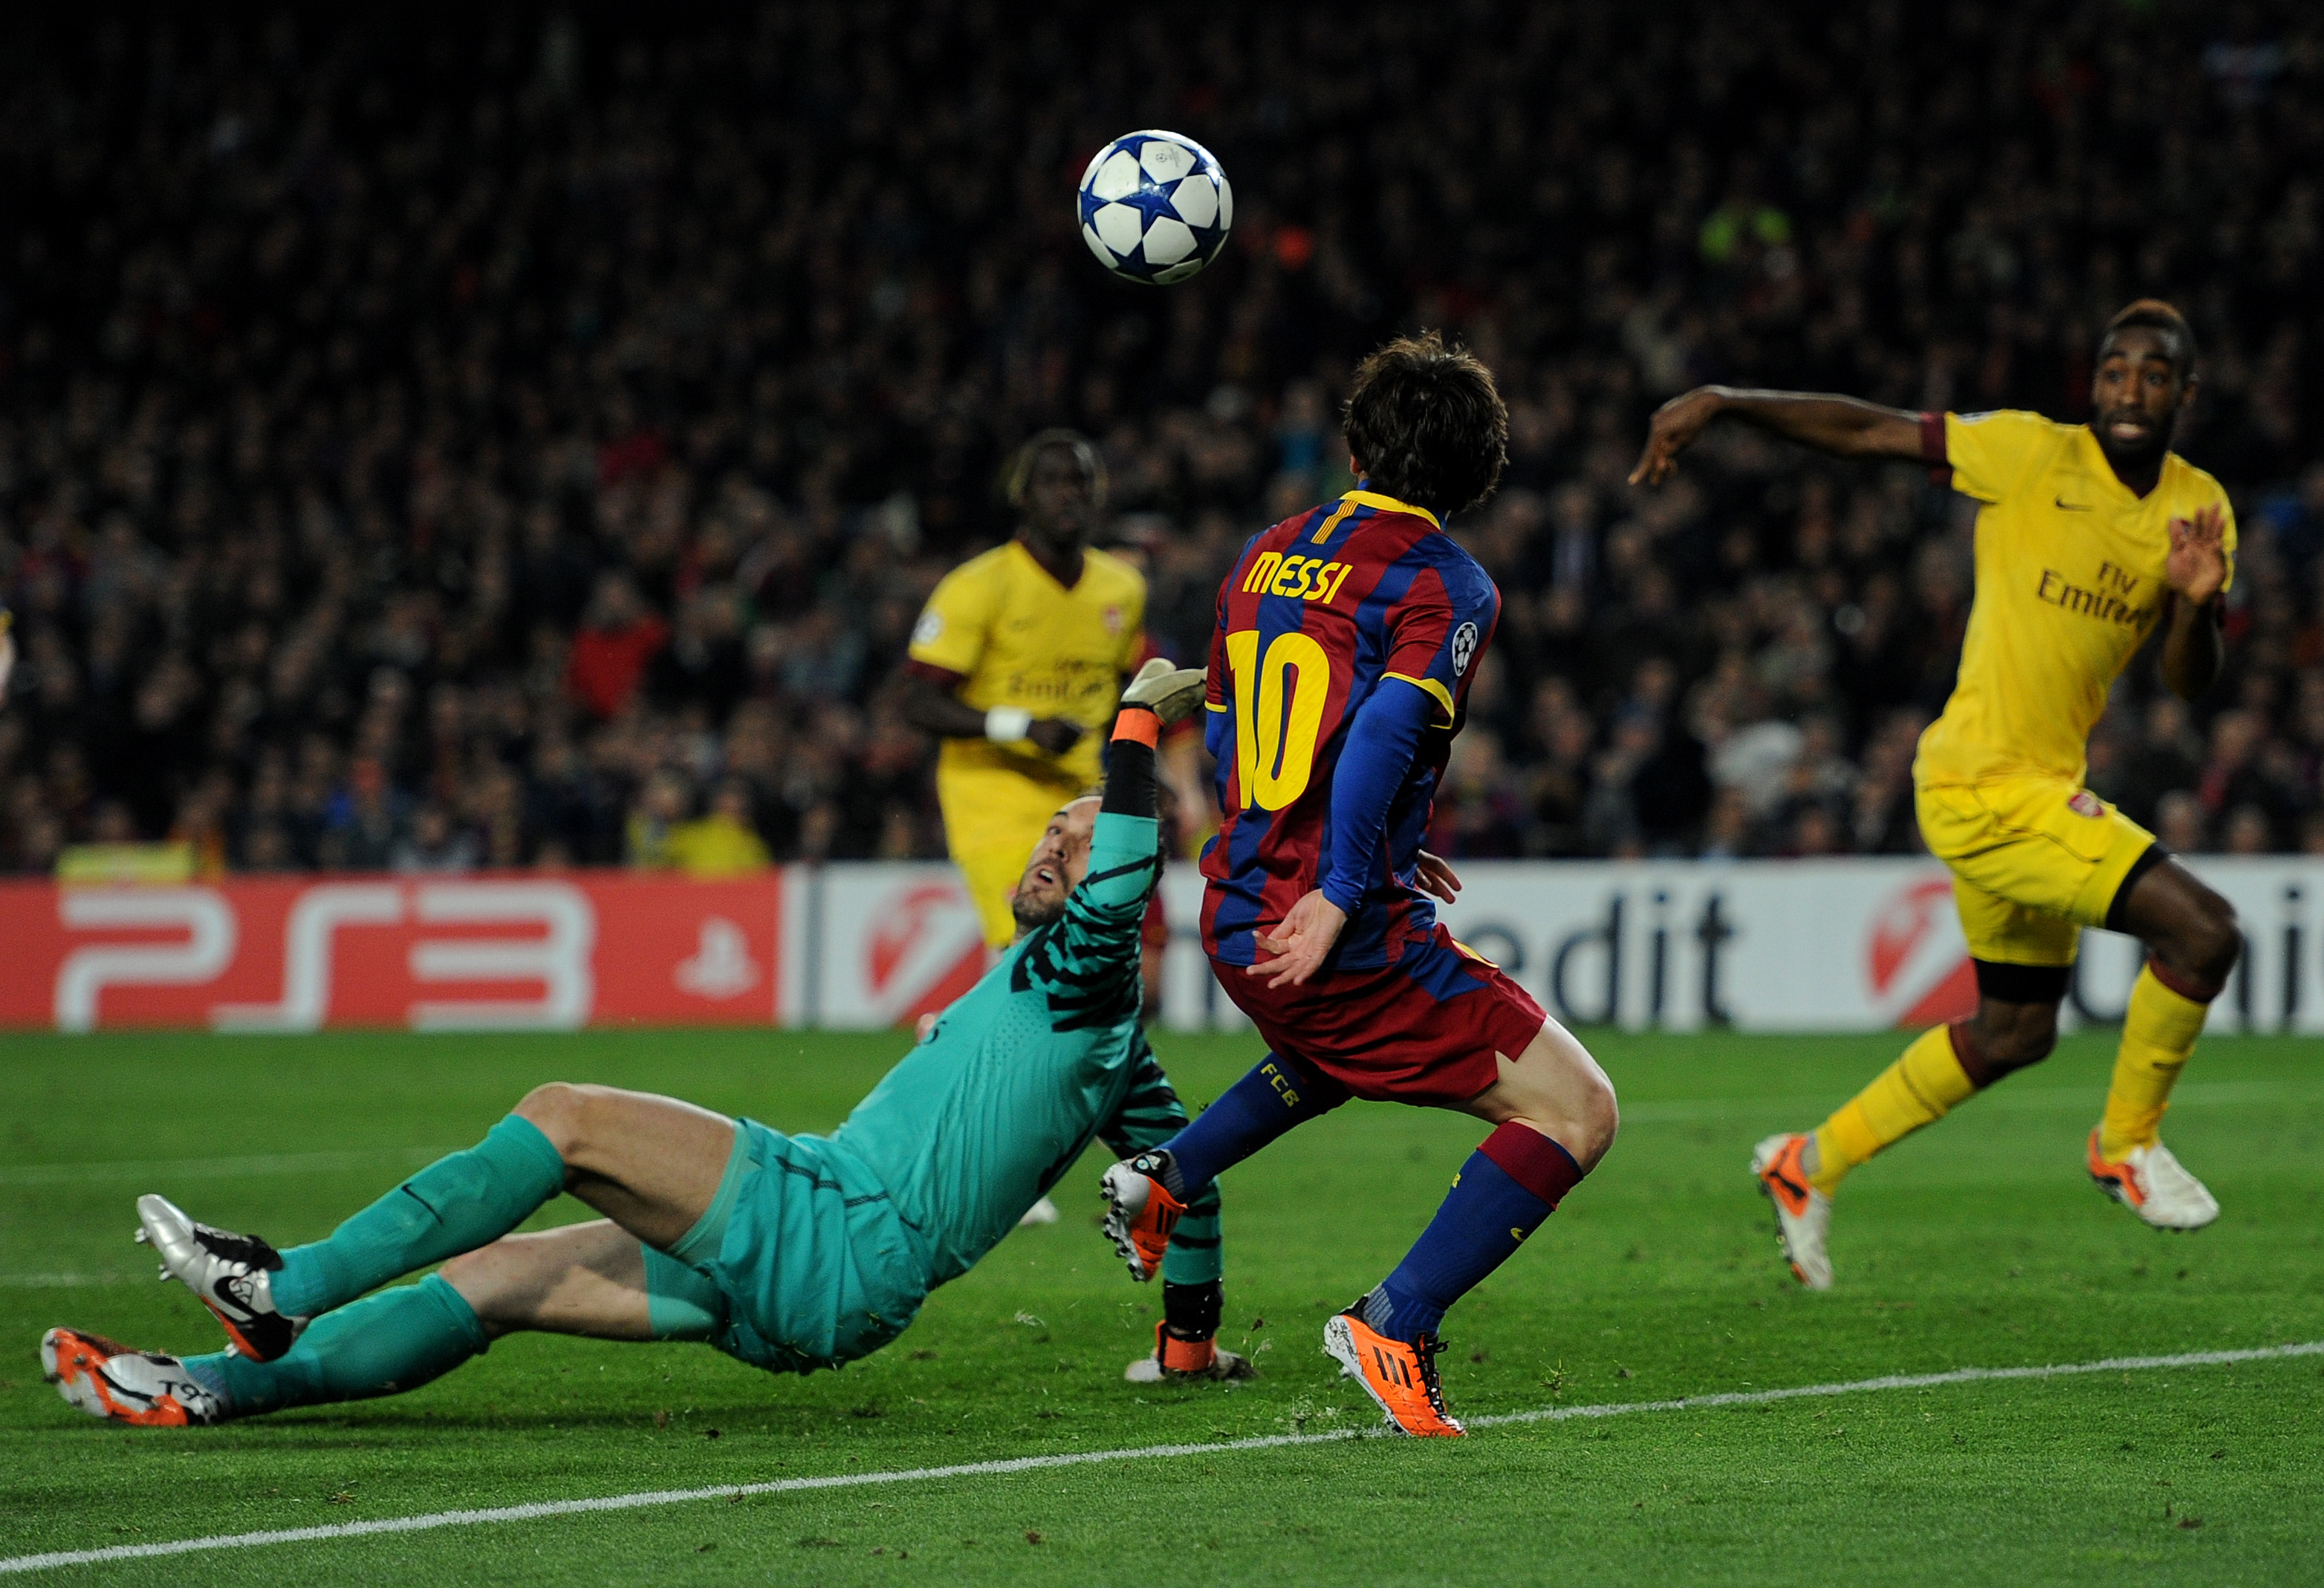 BARCELONA, SPAIN - MARCH 08:  Goalkeeper Manuel Almunia (L) of Arsenal fails to stop Lionel Messi of Barcelona from scoring the opening goal during the UEFA Champions League round of 16 second leg match between Barcelona and Arsenal on March 8, 2011 in Ba